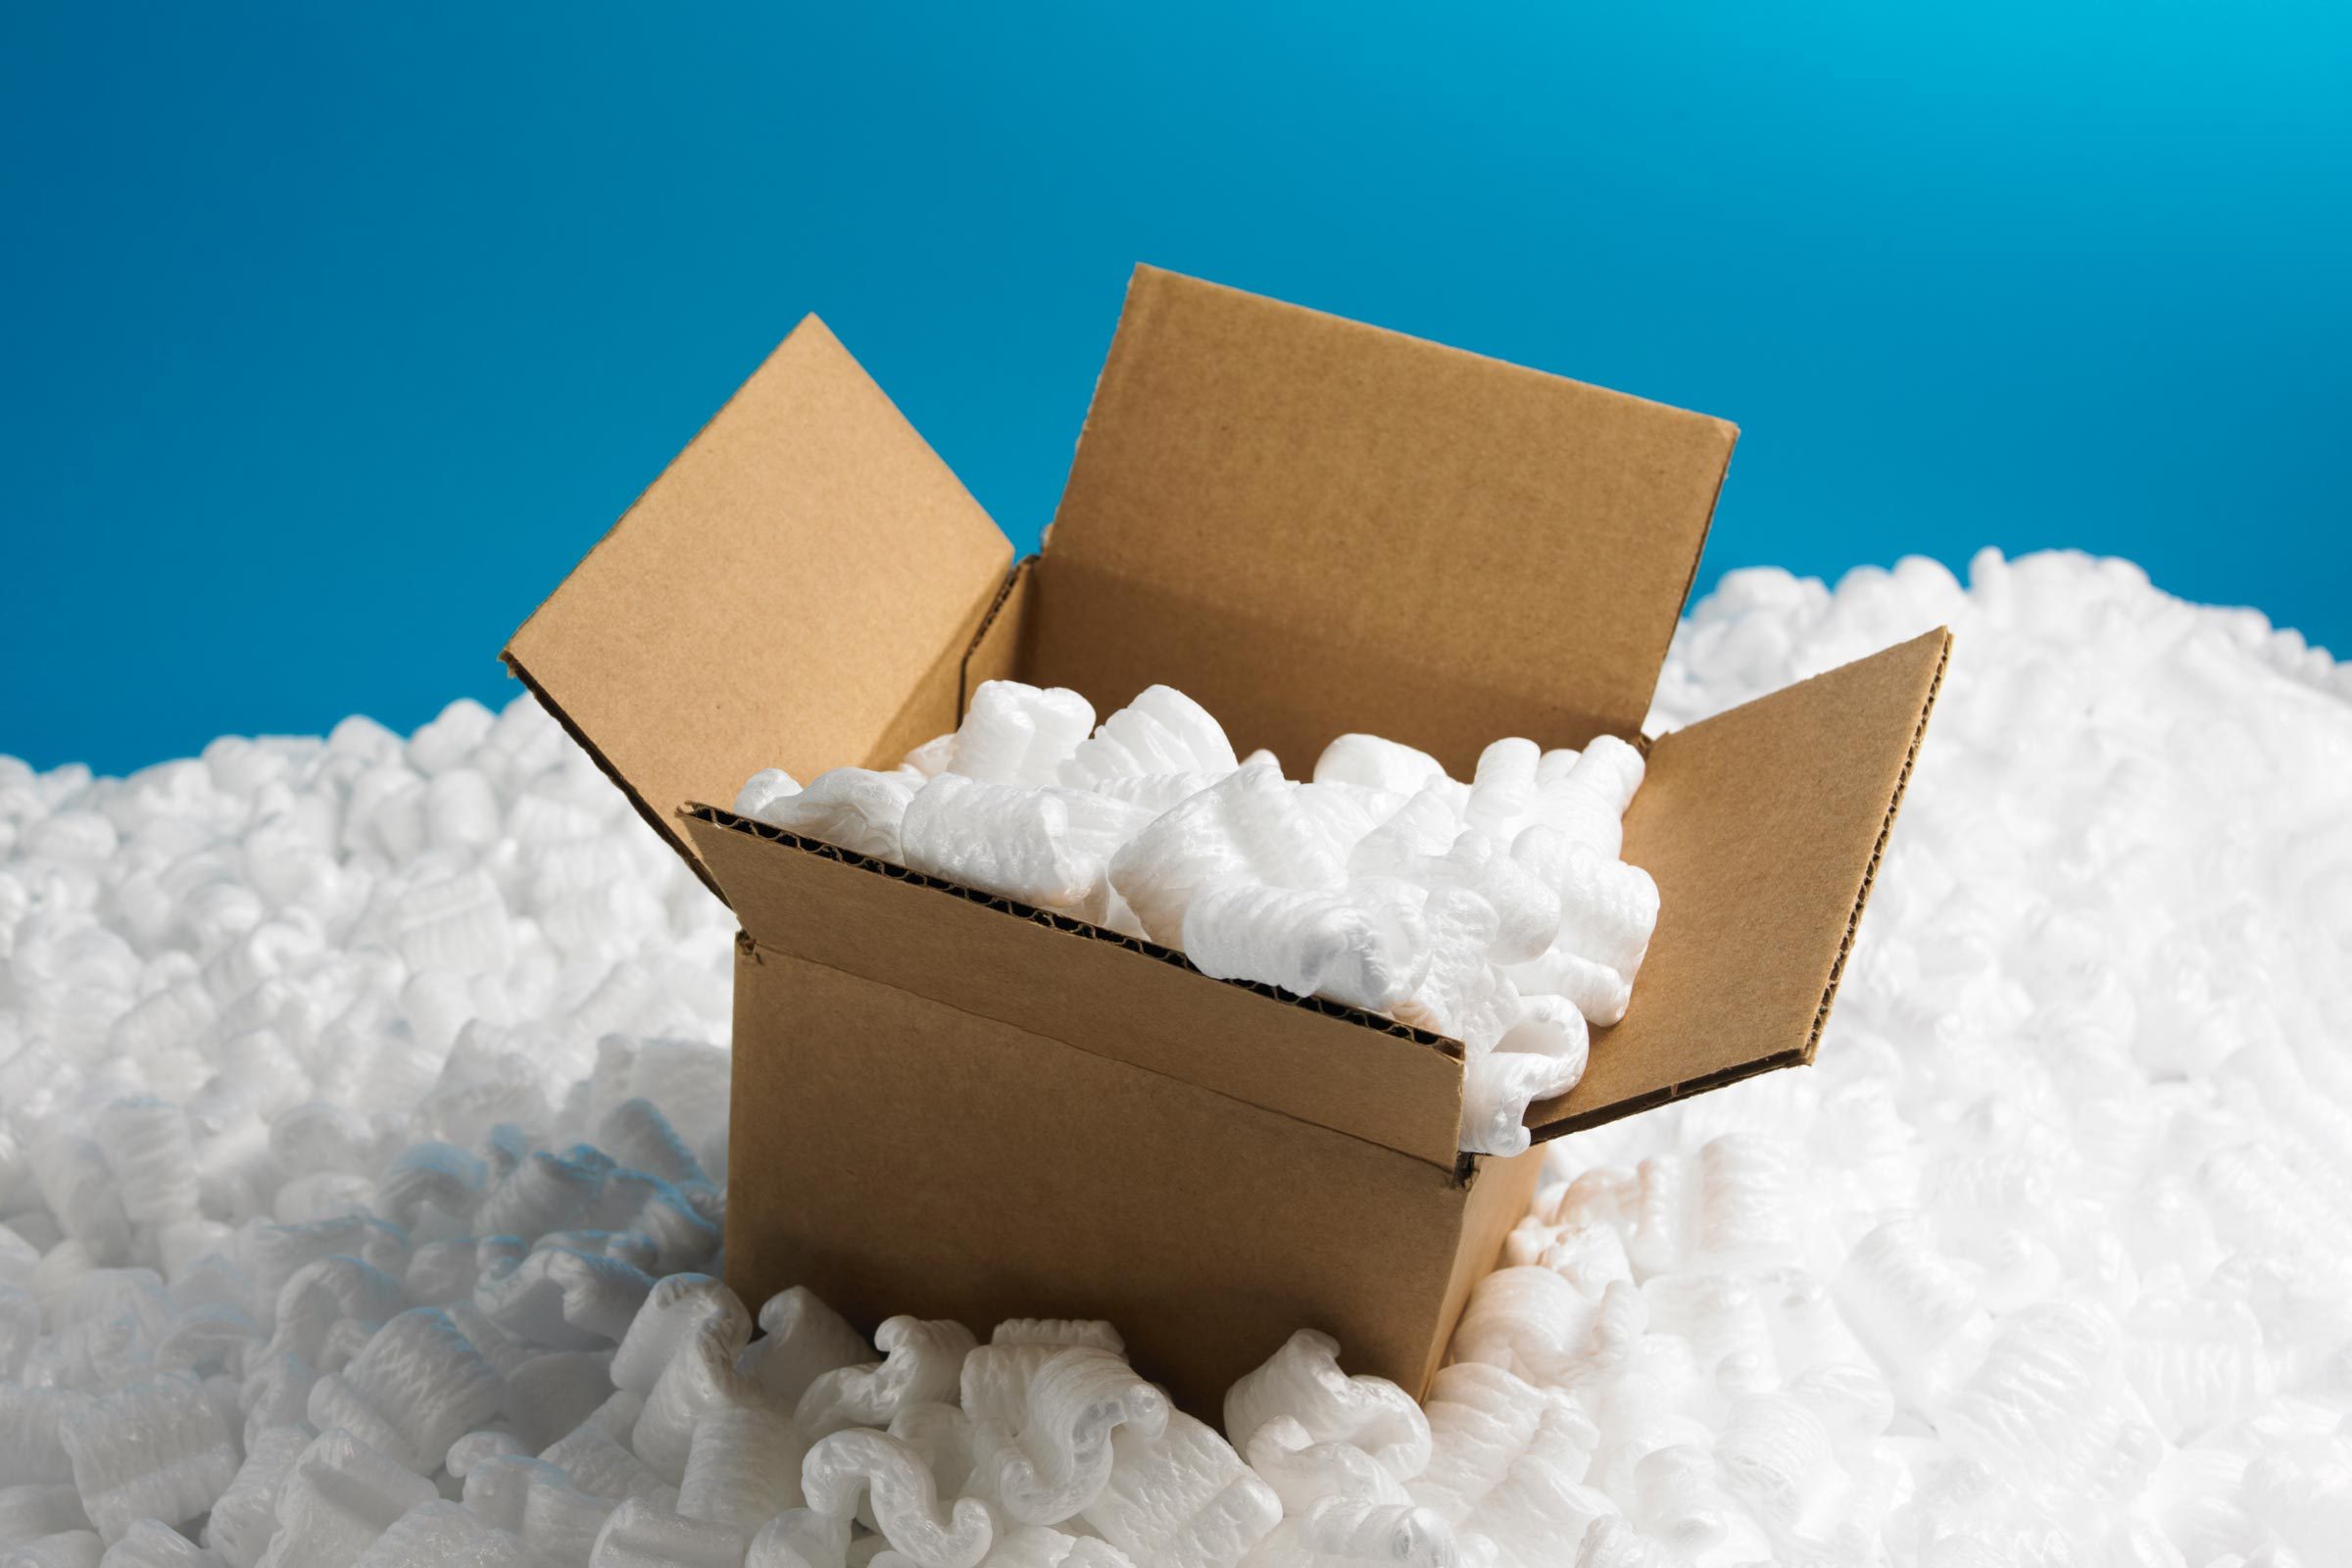 Packing Peanuts Recyclable Clearance Selling, Save 45% | jlcatj.gob.mx